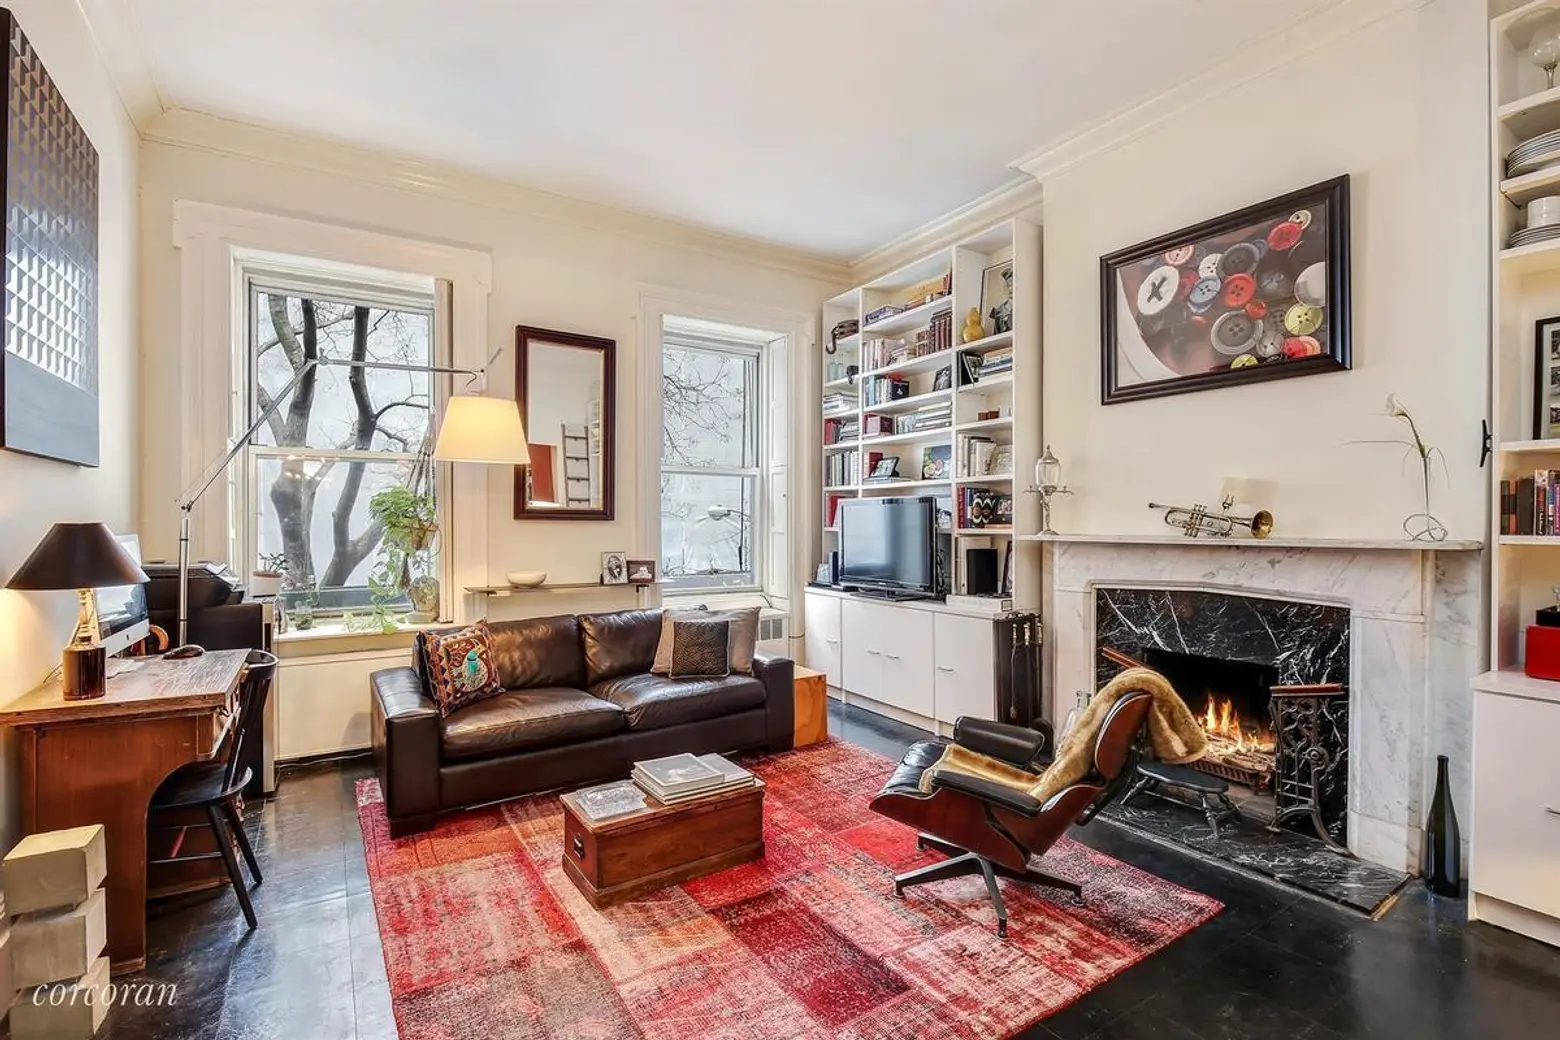 This colorful Gramercy co-op is a $925K cure for the winter blahs